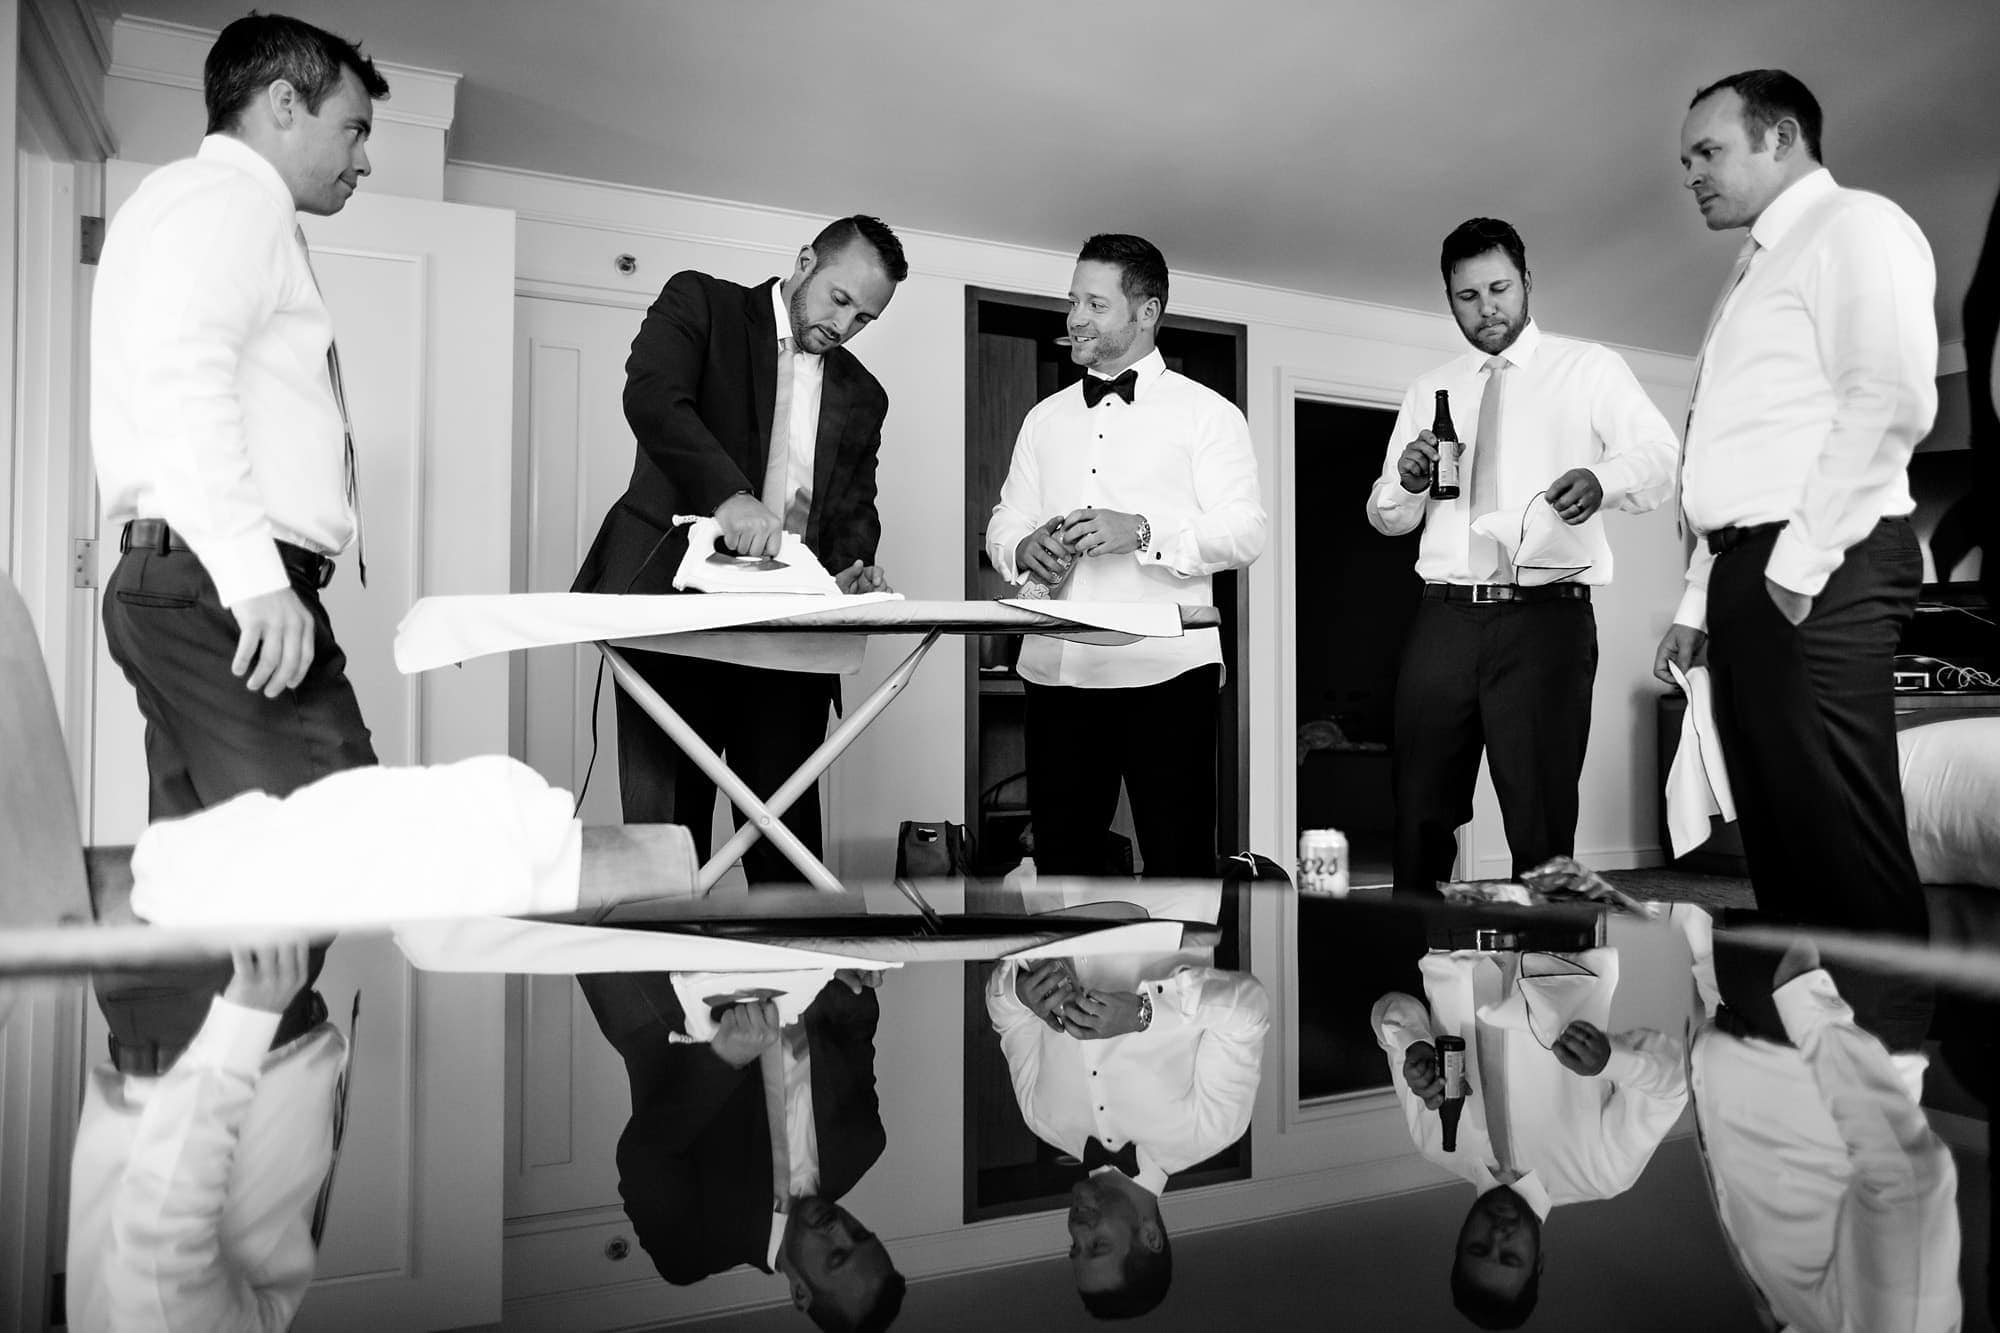 A group of groomsmen help the groom with some ironing while drinking beer inside a hotel in Chicago before the wedding.